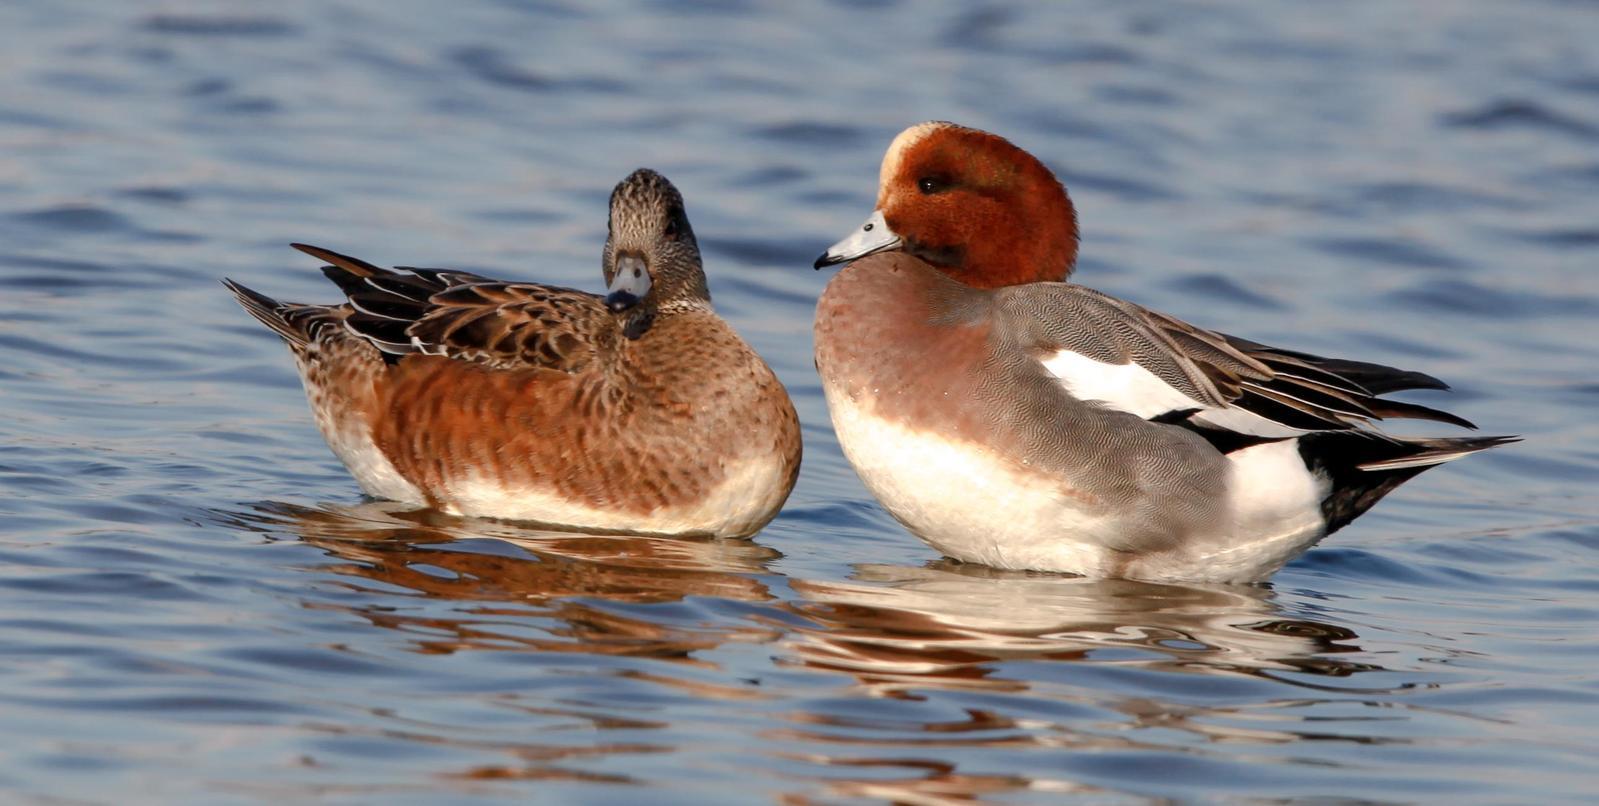 Eurasian Wigeon Photo by Lucy Wightman